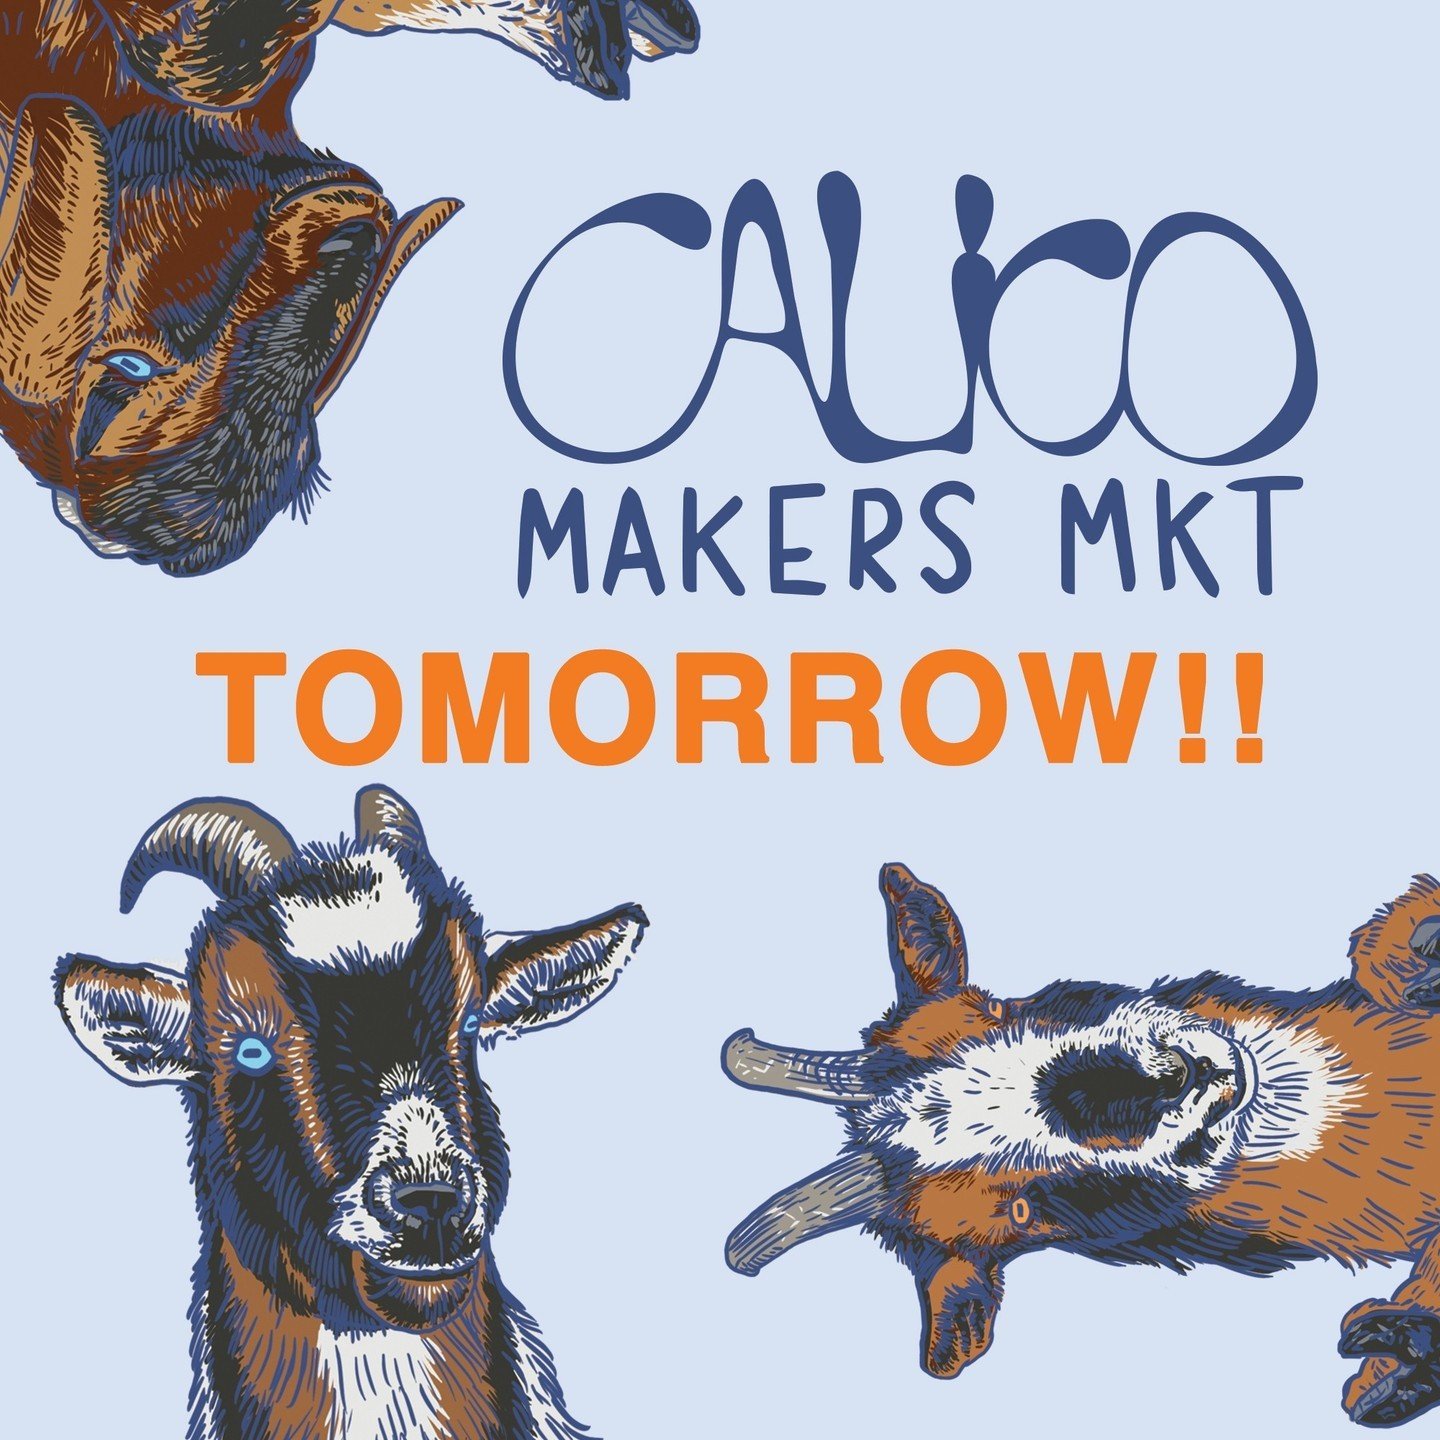 ⭐️🤩❗️Tomorrow❗️🤩⭐️⁠
⁠
Our spring makers market start TOMORROW at 10am and goes until 5pm! ⁠
⁠
There's no better way to bring in the spring than to join us for our 7th bi-annual Calico Makers Market!⁠
⁠
⁠This year&rsquo;s spring market features many